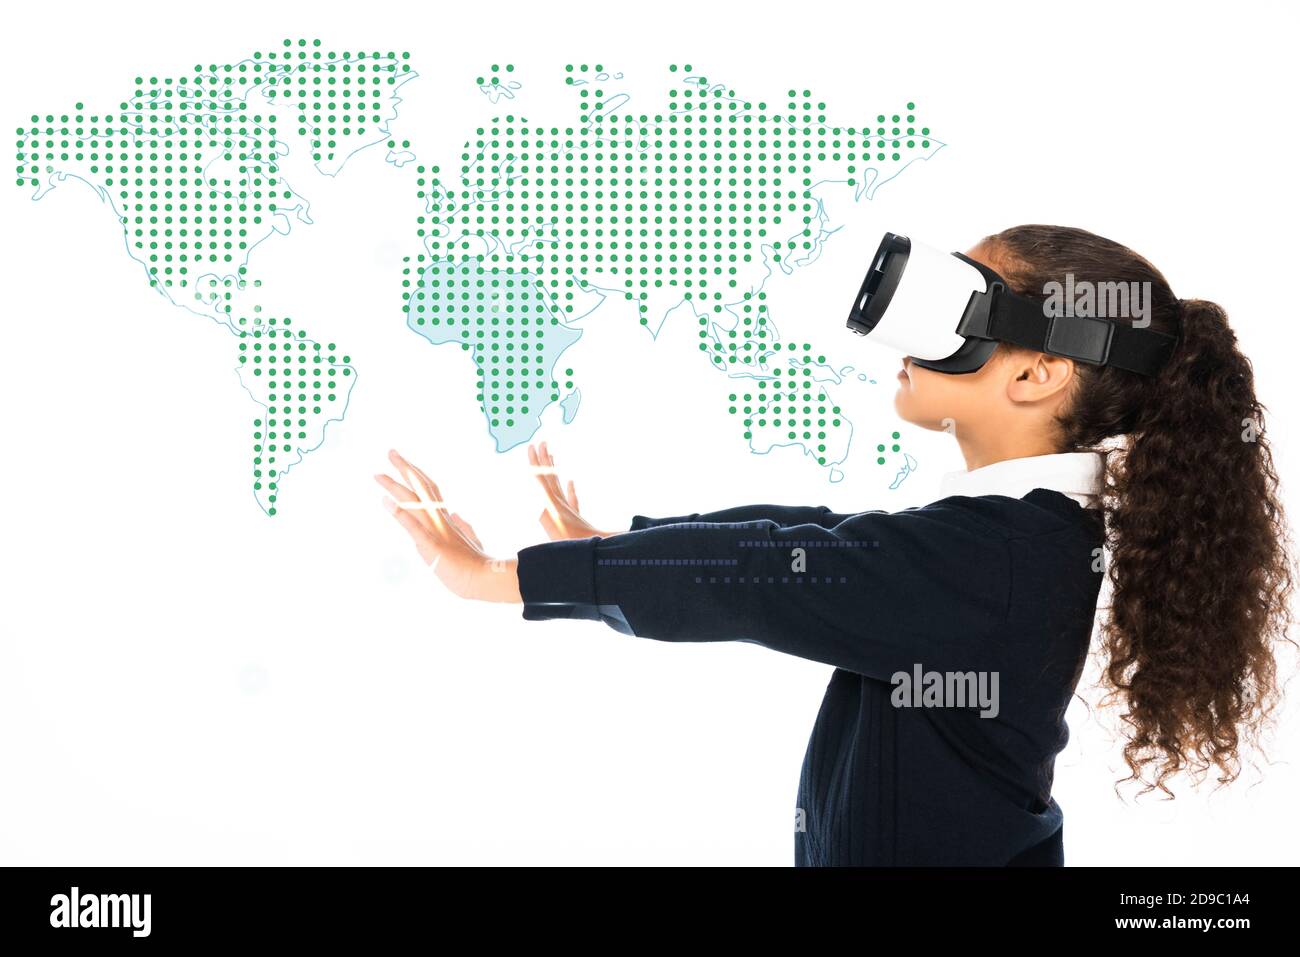 african american schoolgirl with outstretched hands using virtual reality headset isolated on white, global map illustration Stock Photo